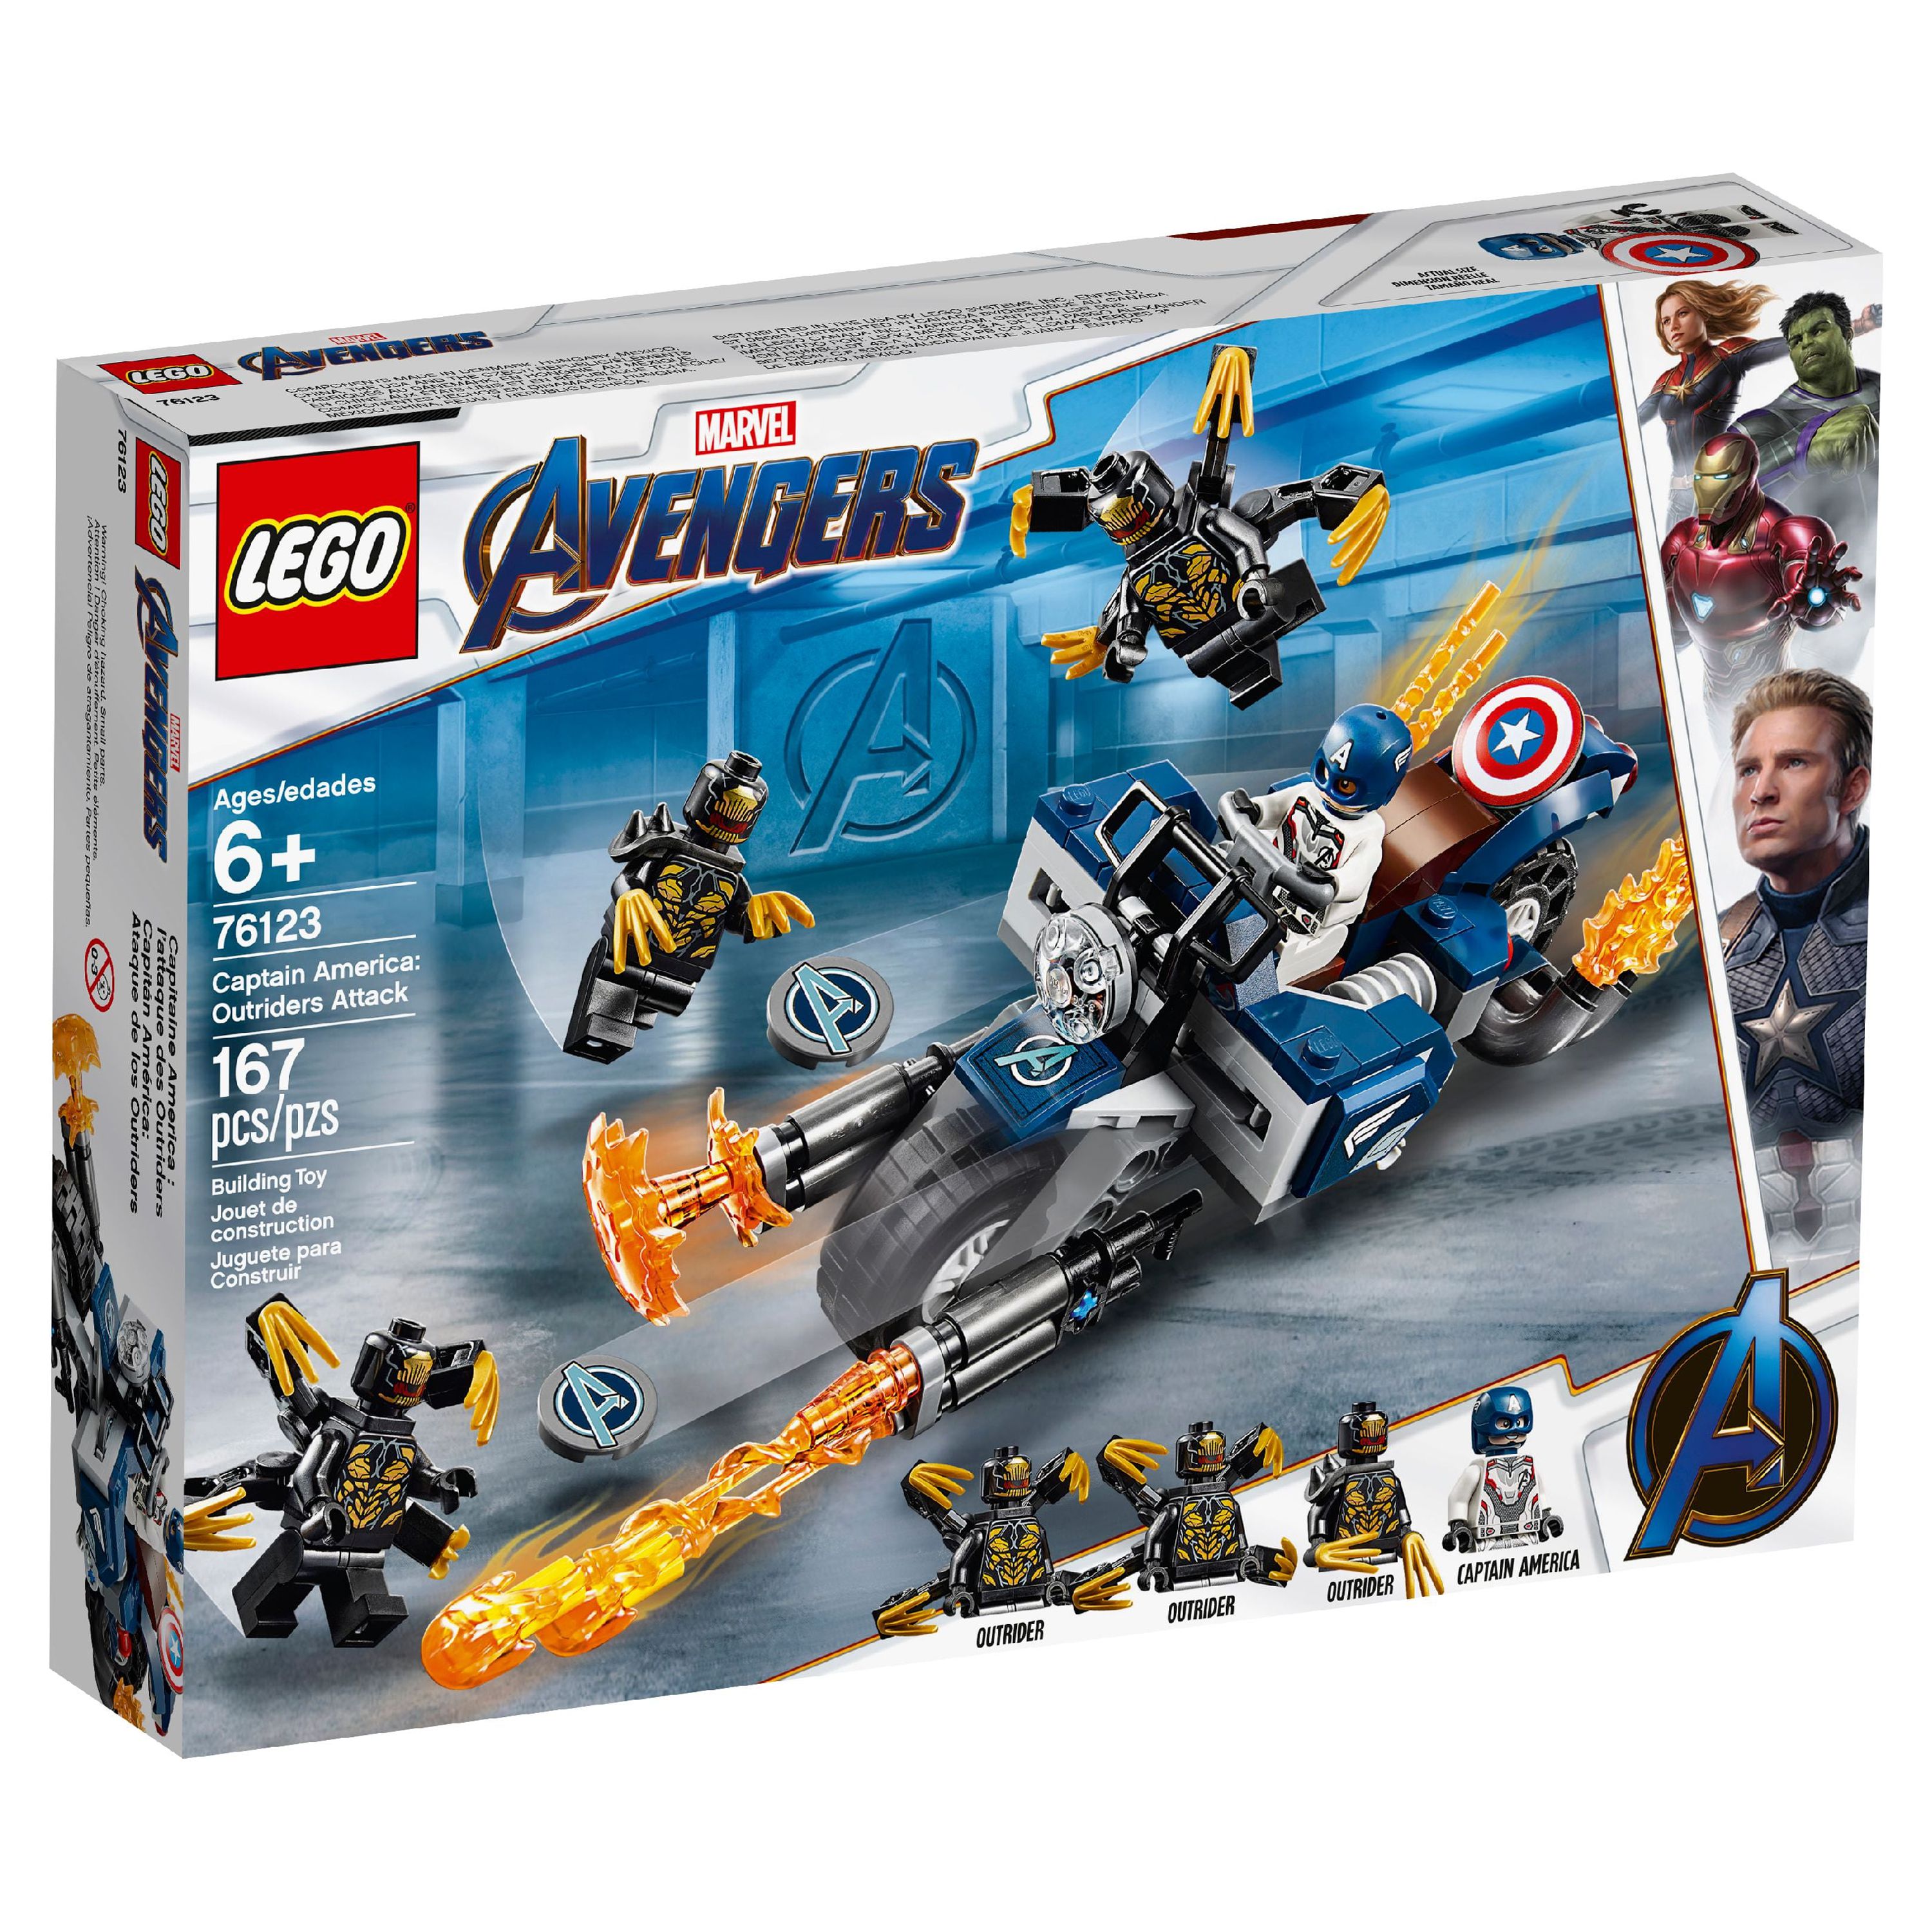 LEGO Marvel Avengers Captain America: Outriders Attack 76123 - image 5 of 8